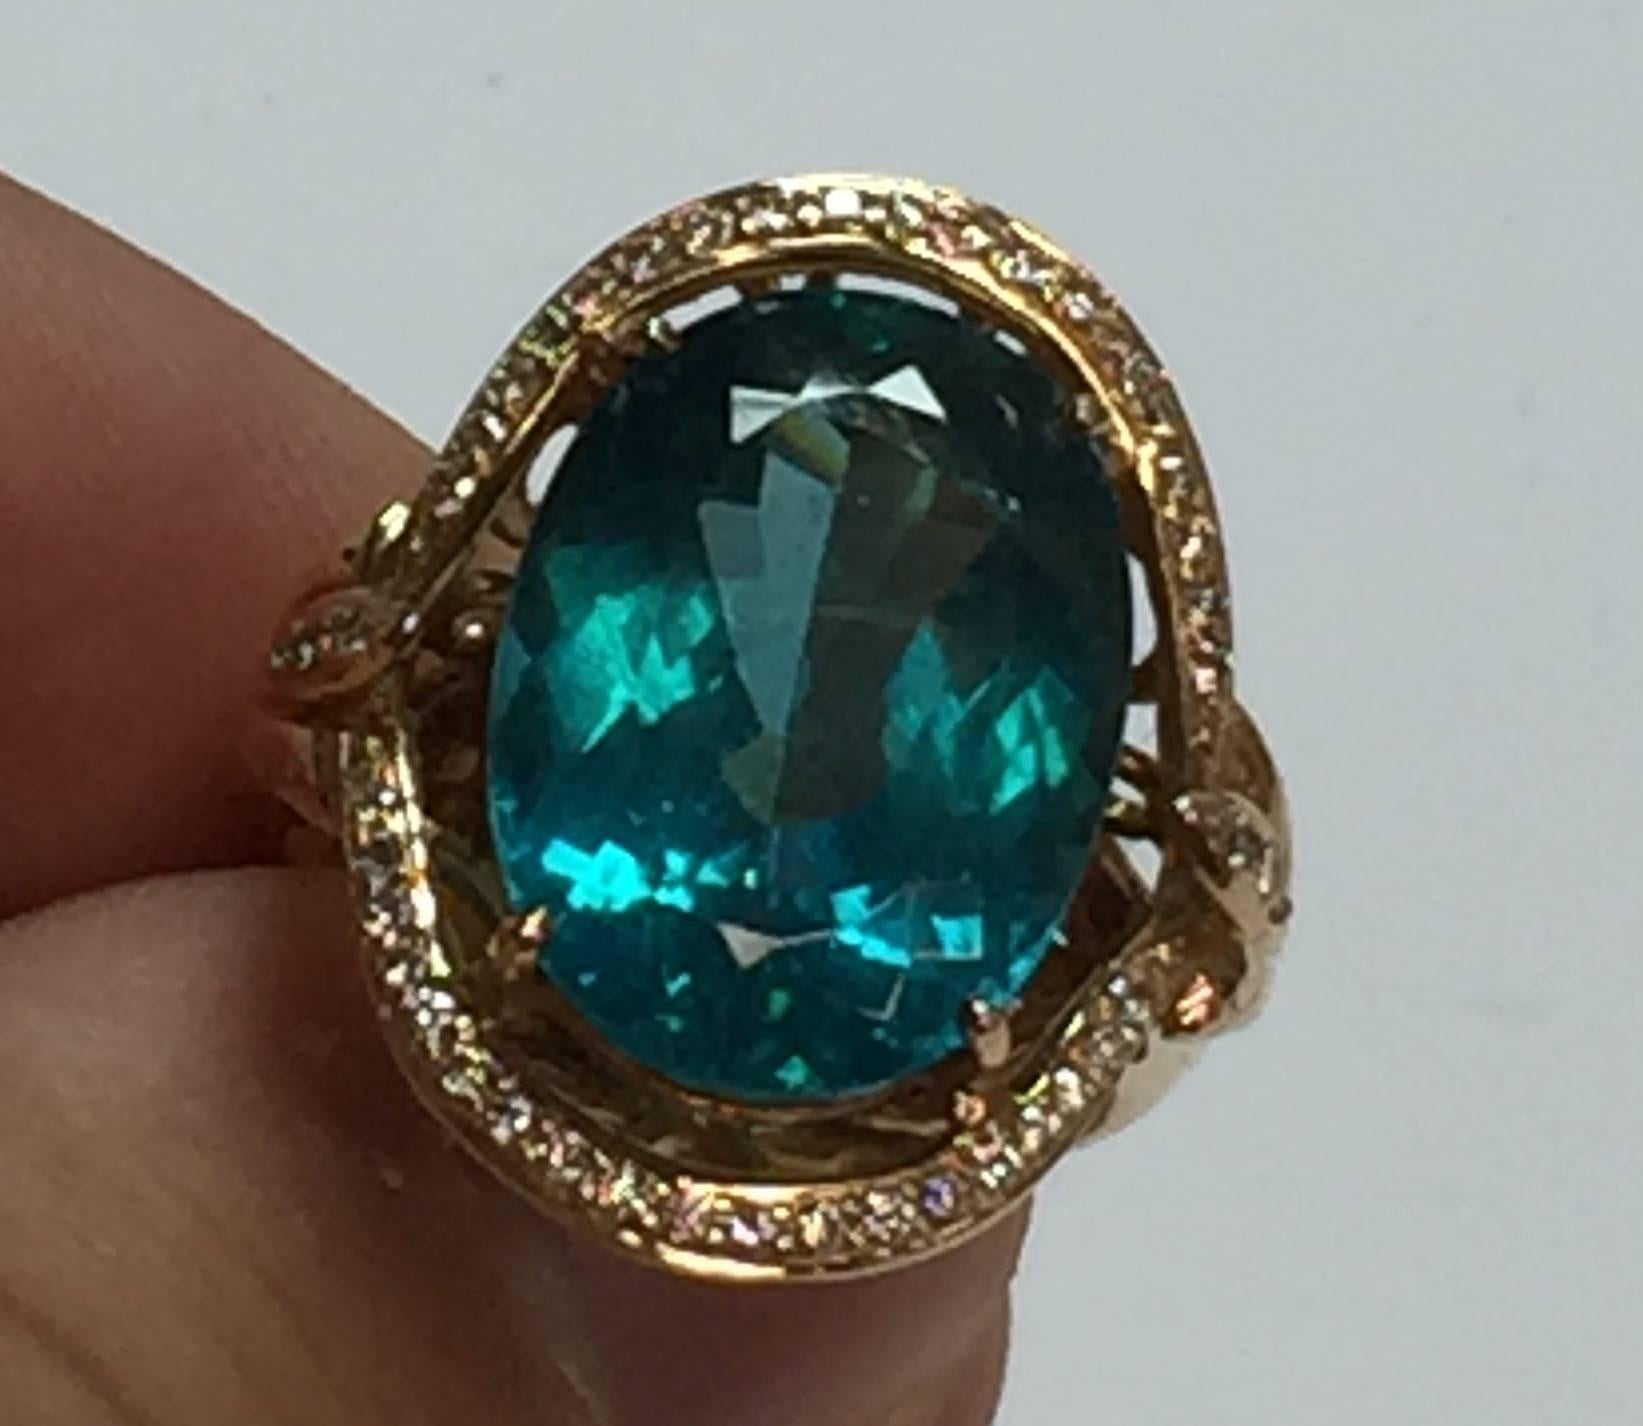 Beautifully colored Apatite ring in 18k Rose Gold with 44 diamonds weighing a total of about .30cts.  The center stone features a 13.61 carat Apatite.  The ring has very well made wire work in rose gold.  